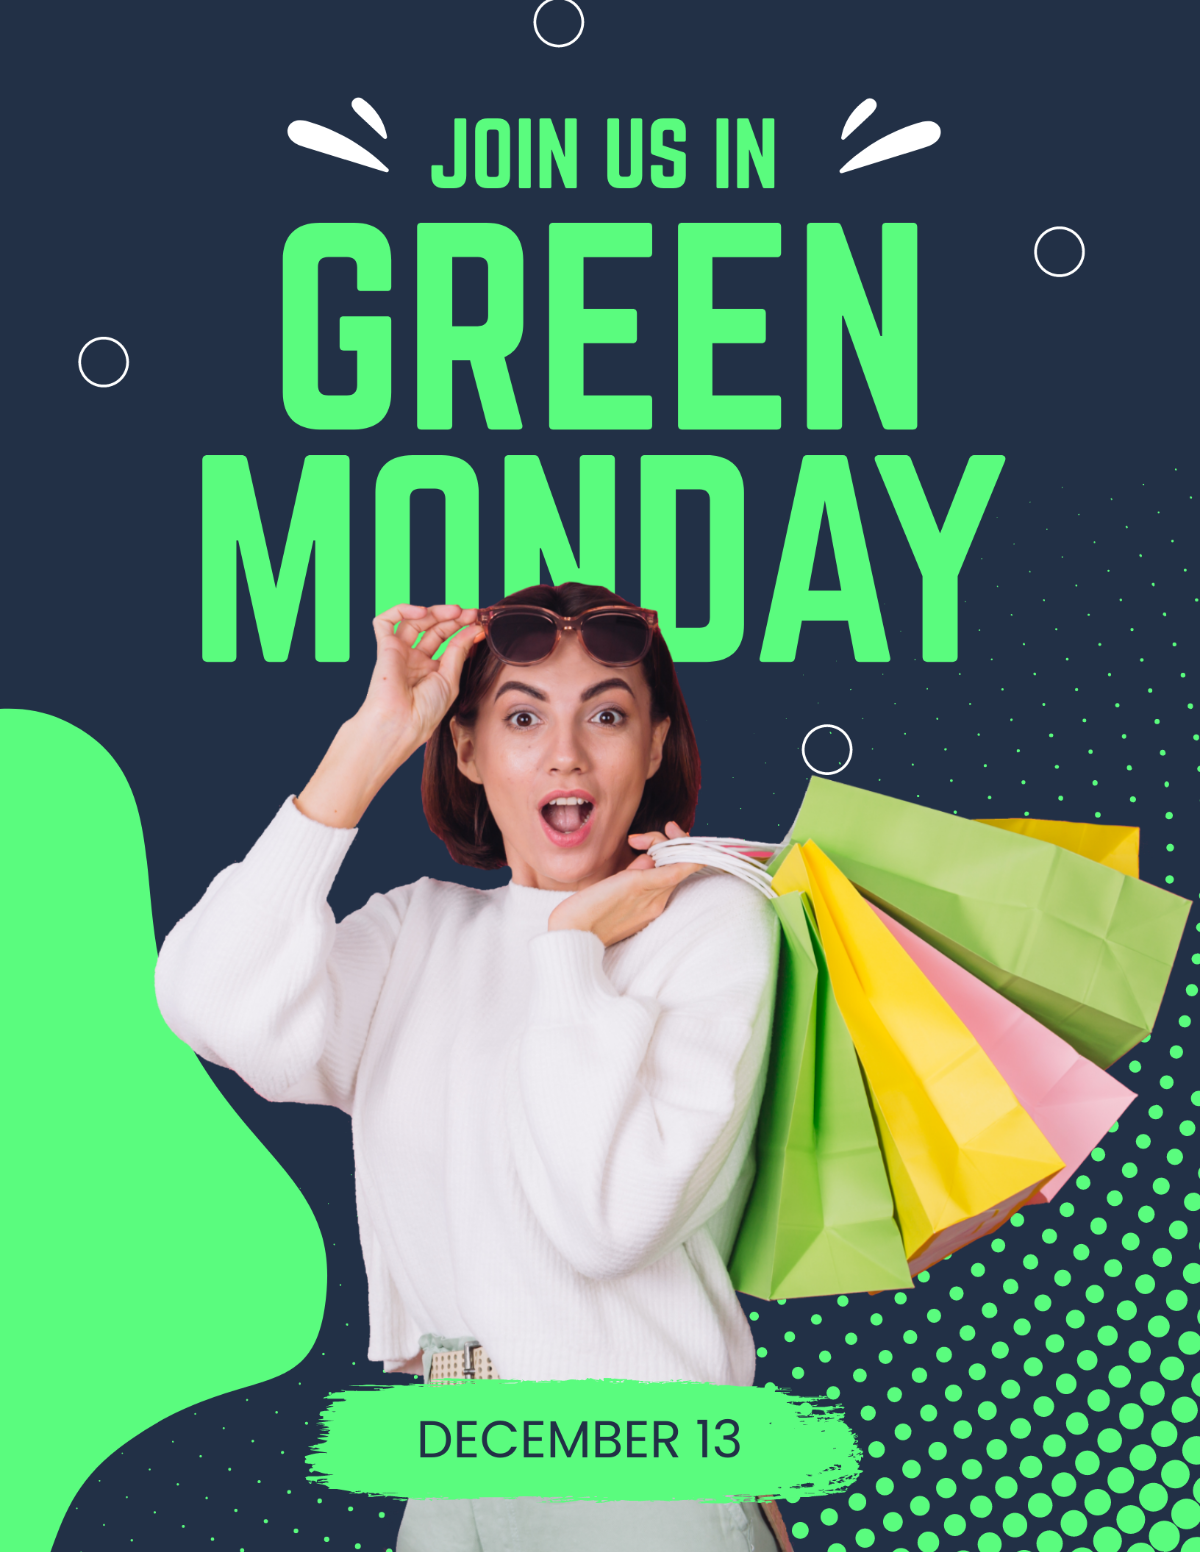 Green Monday Promotion Flyer Template